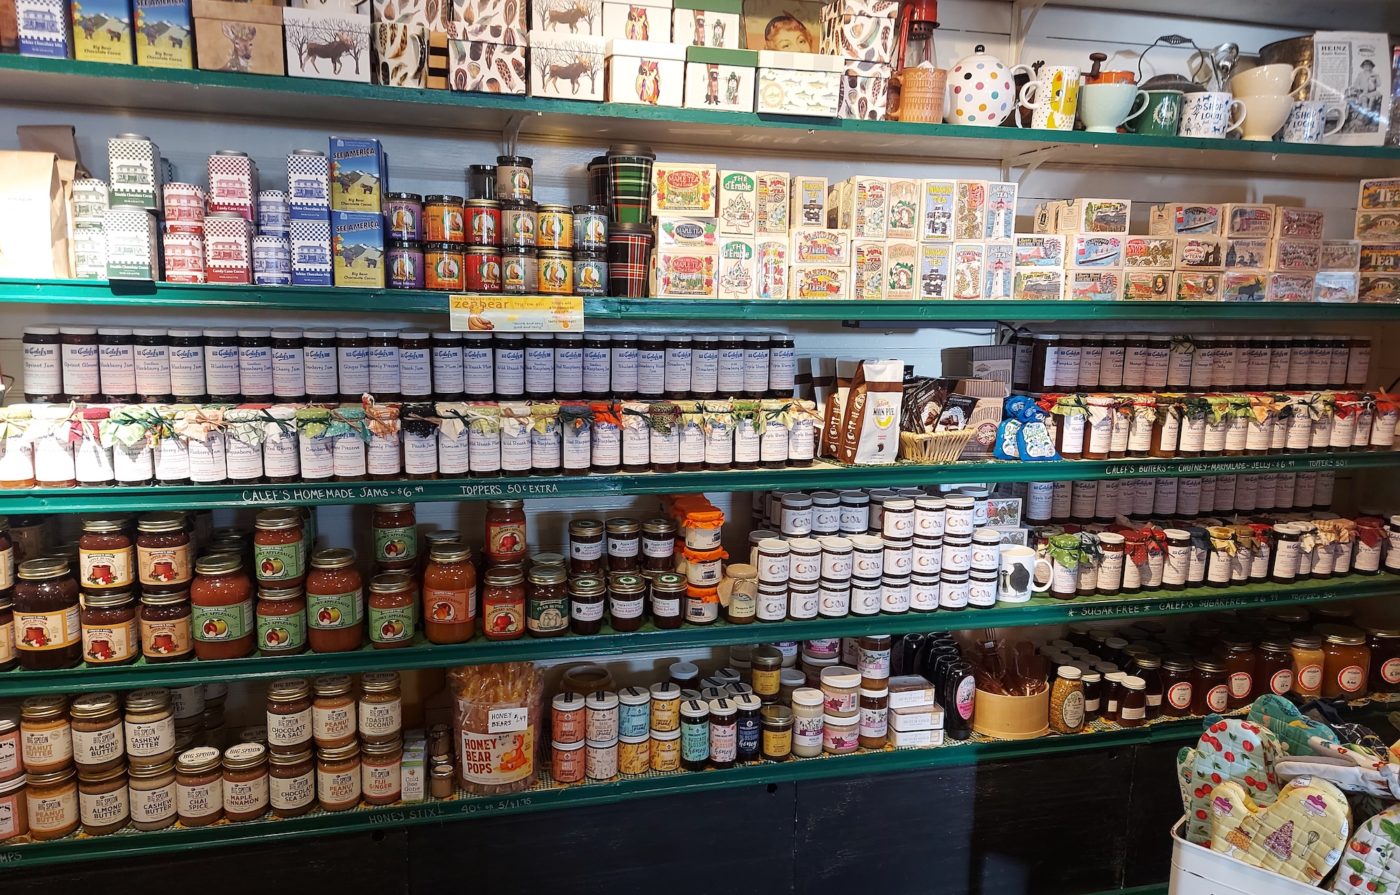 Calef's Country Store jam wall, stacked with Calef's finest jams and jellies